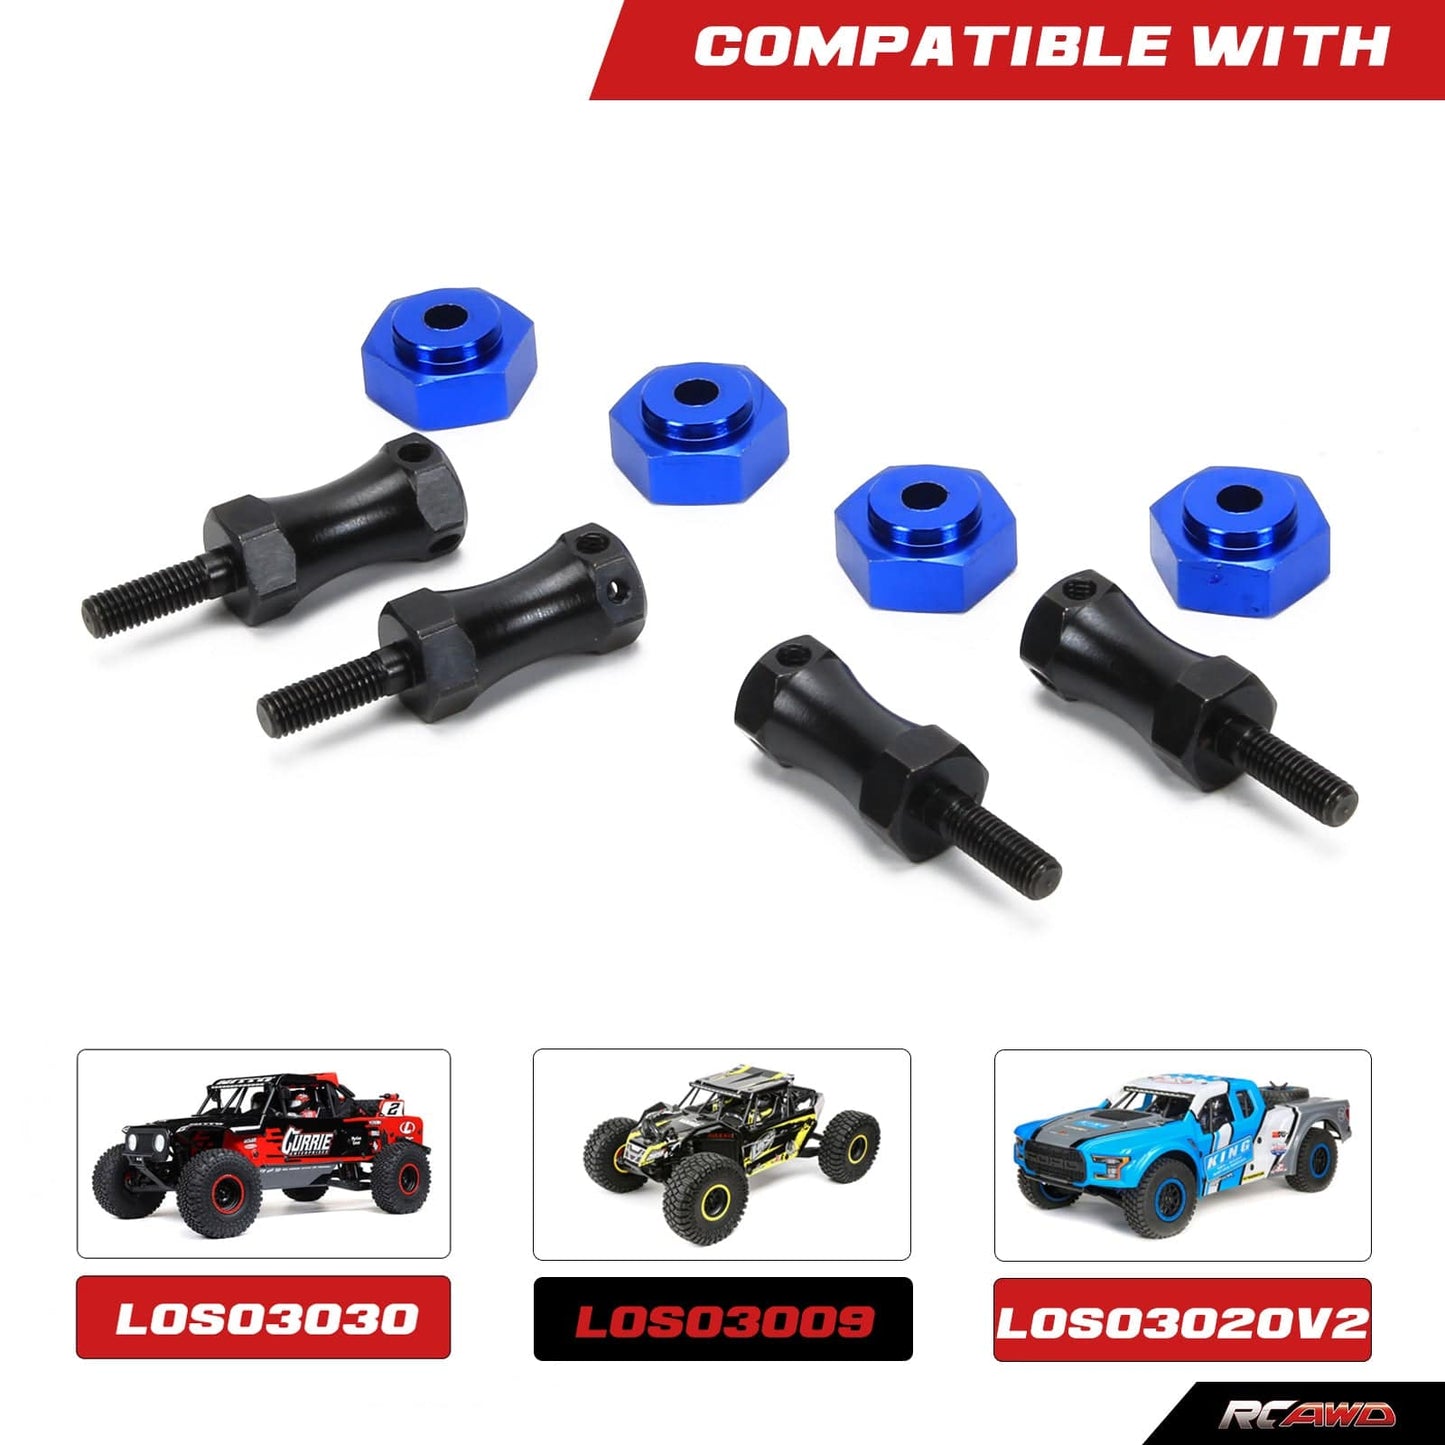 RCAWD Losi Baja Rey Hammer Rey Upgrades Lengthen 15mm to 17mm Hex - RCAWD